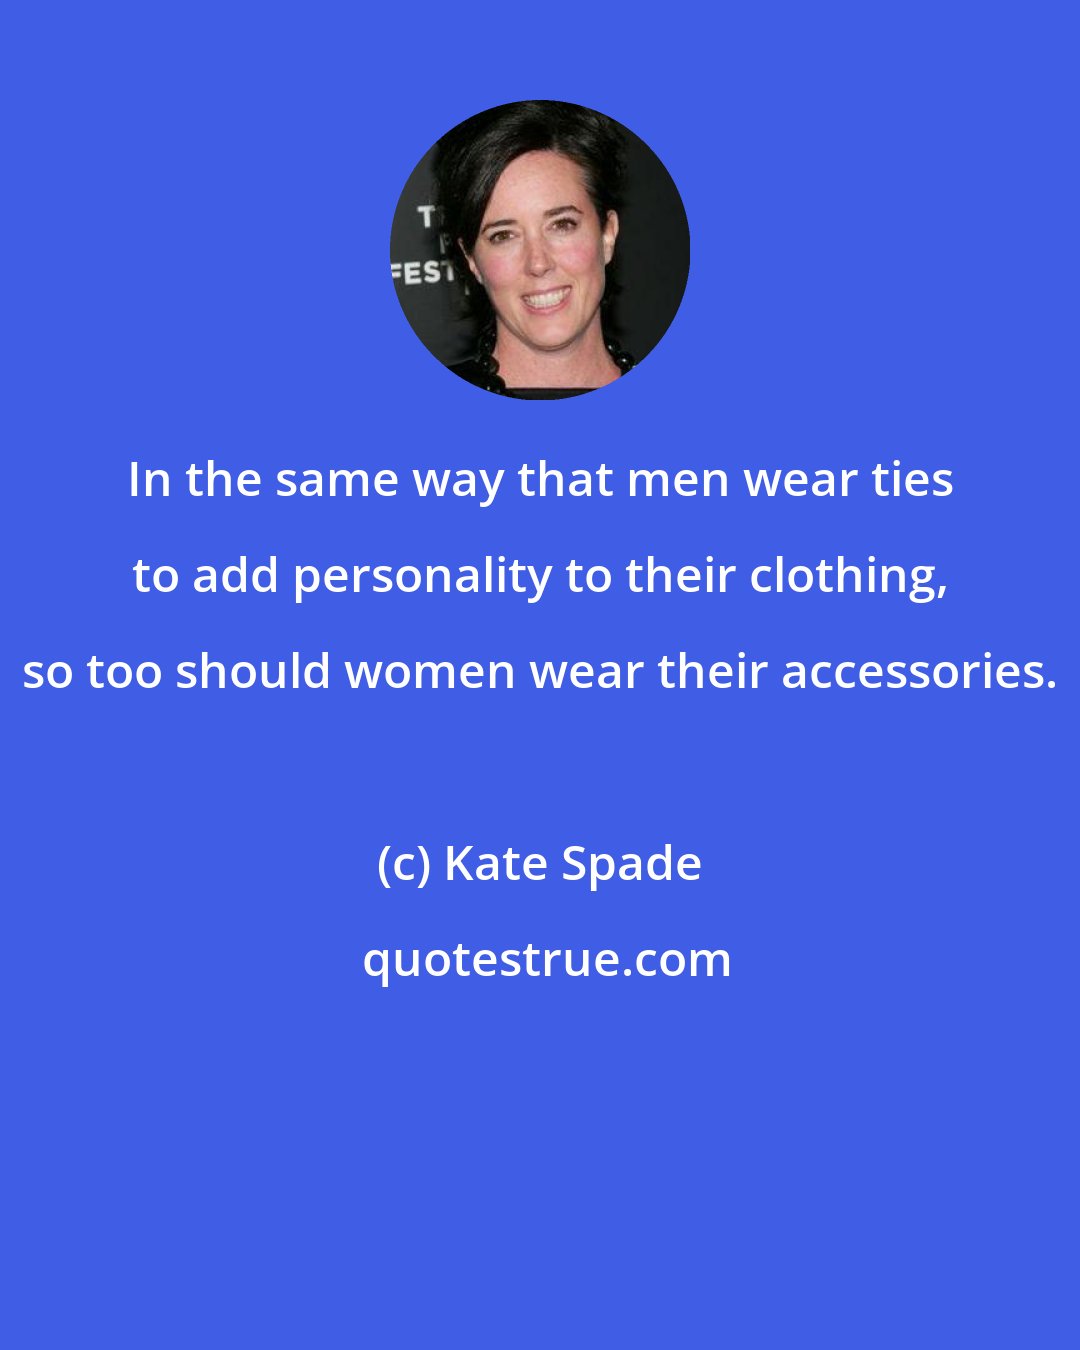 Kate Spade: In the same way that men wear ties to add personality to their clothing, so too should women wear their accessories.